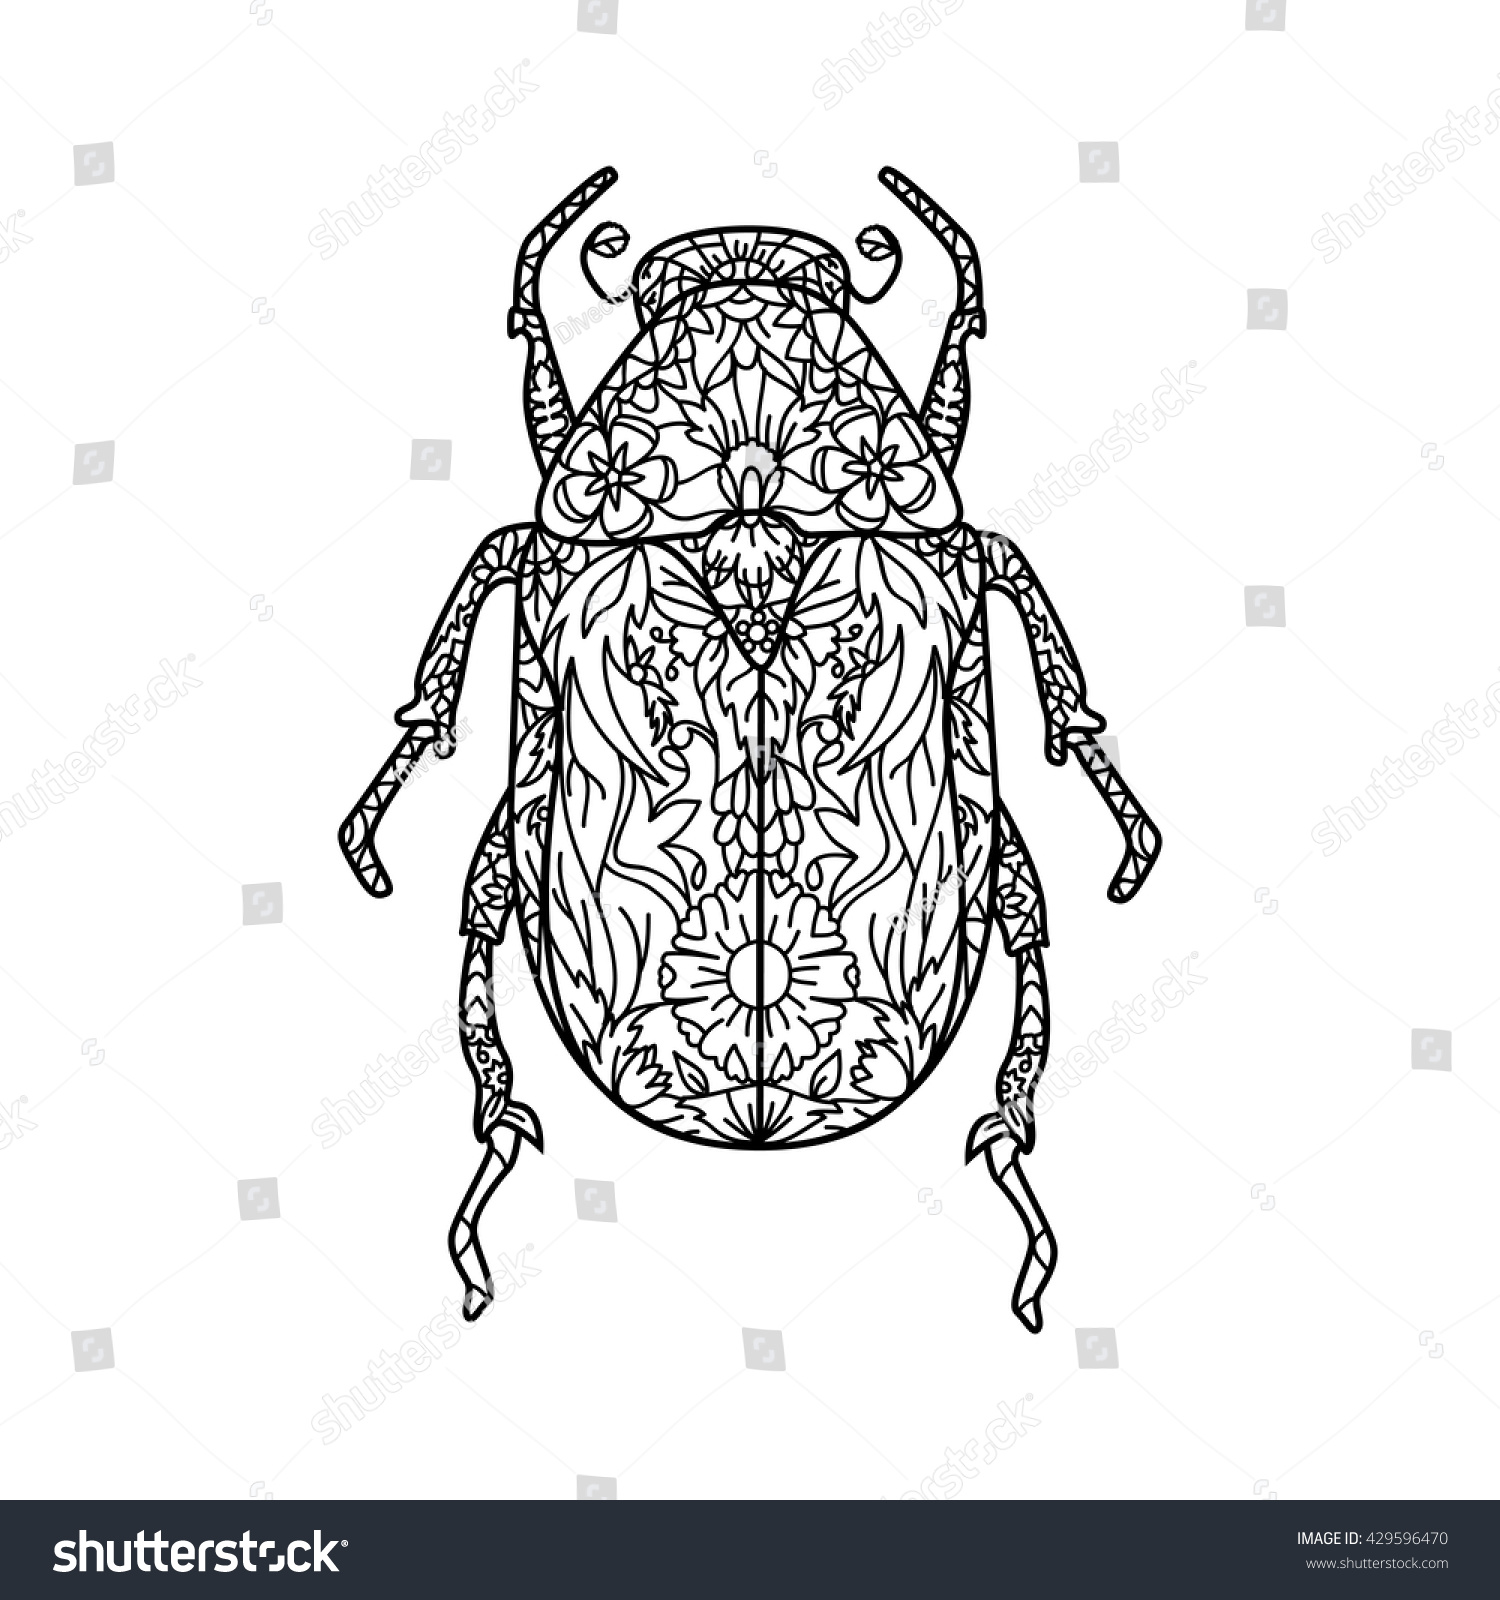 Bug Vector Illustration In Zentangle Style. Contour Drawing ...